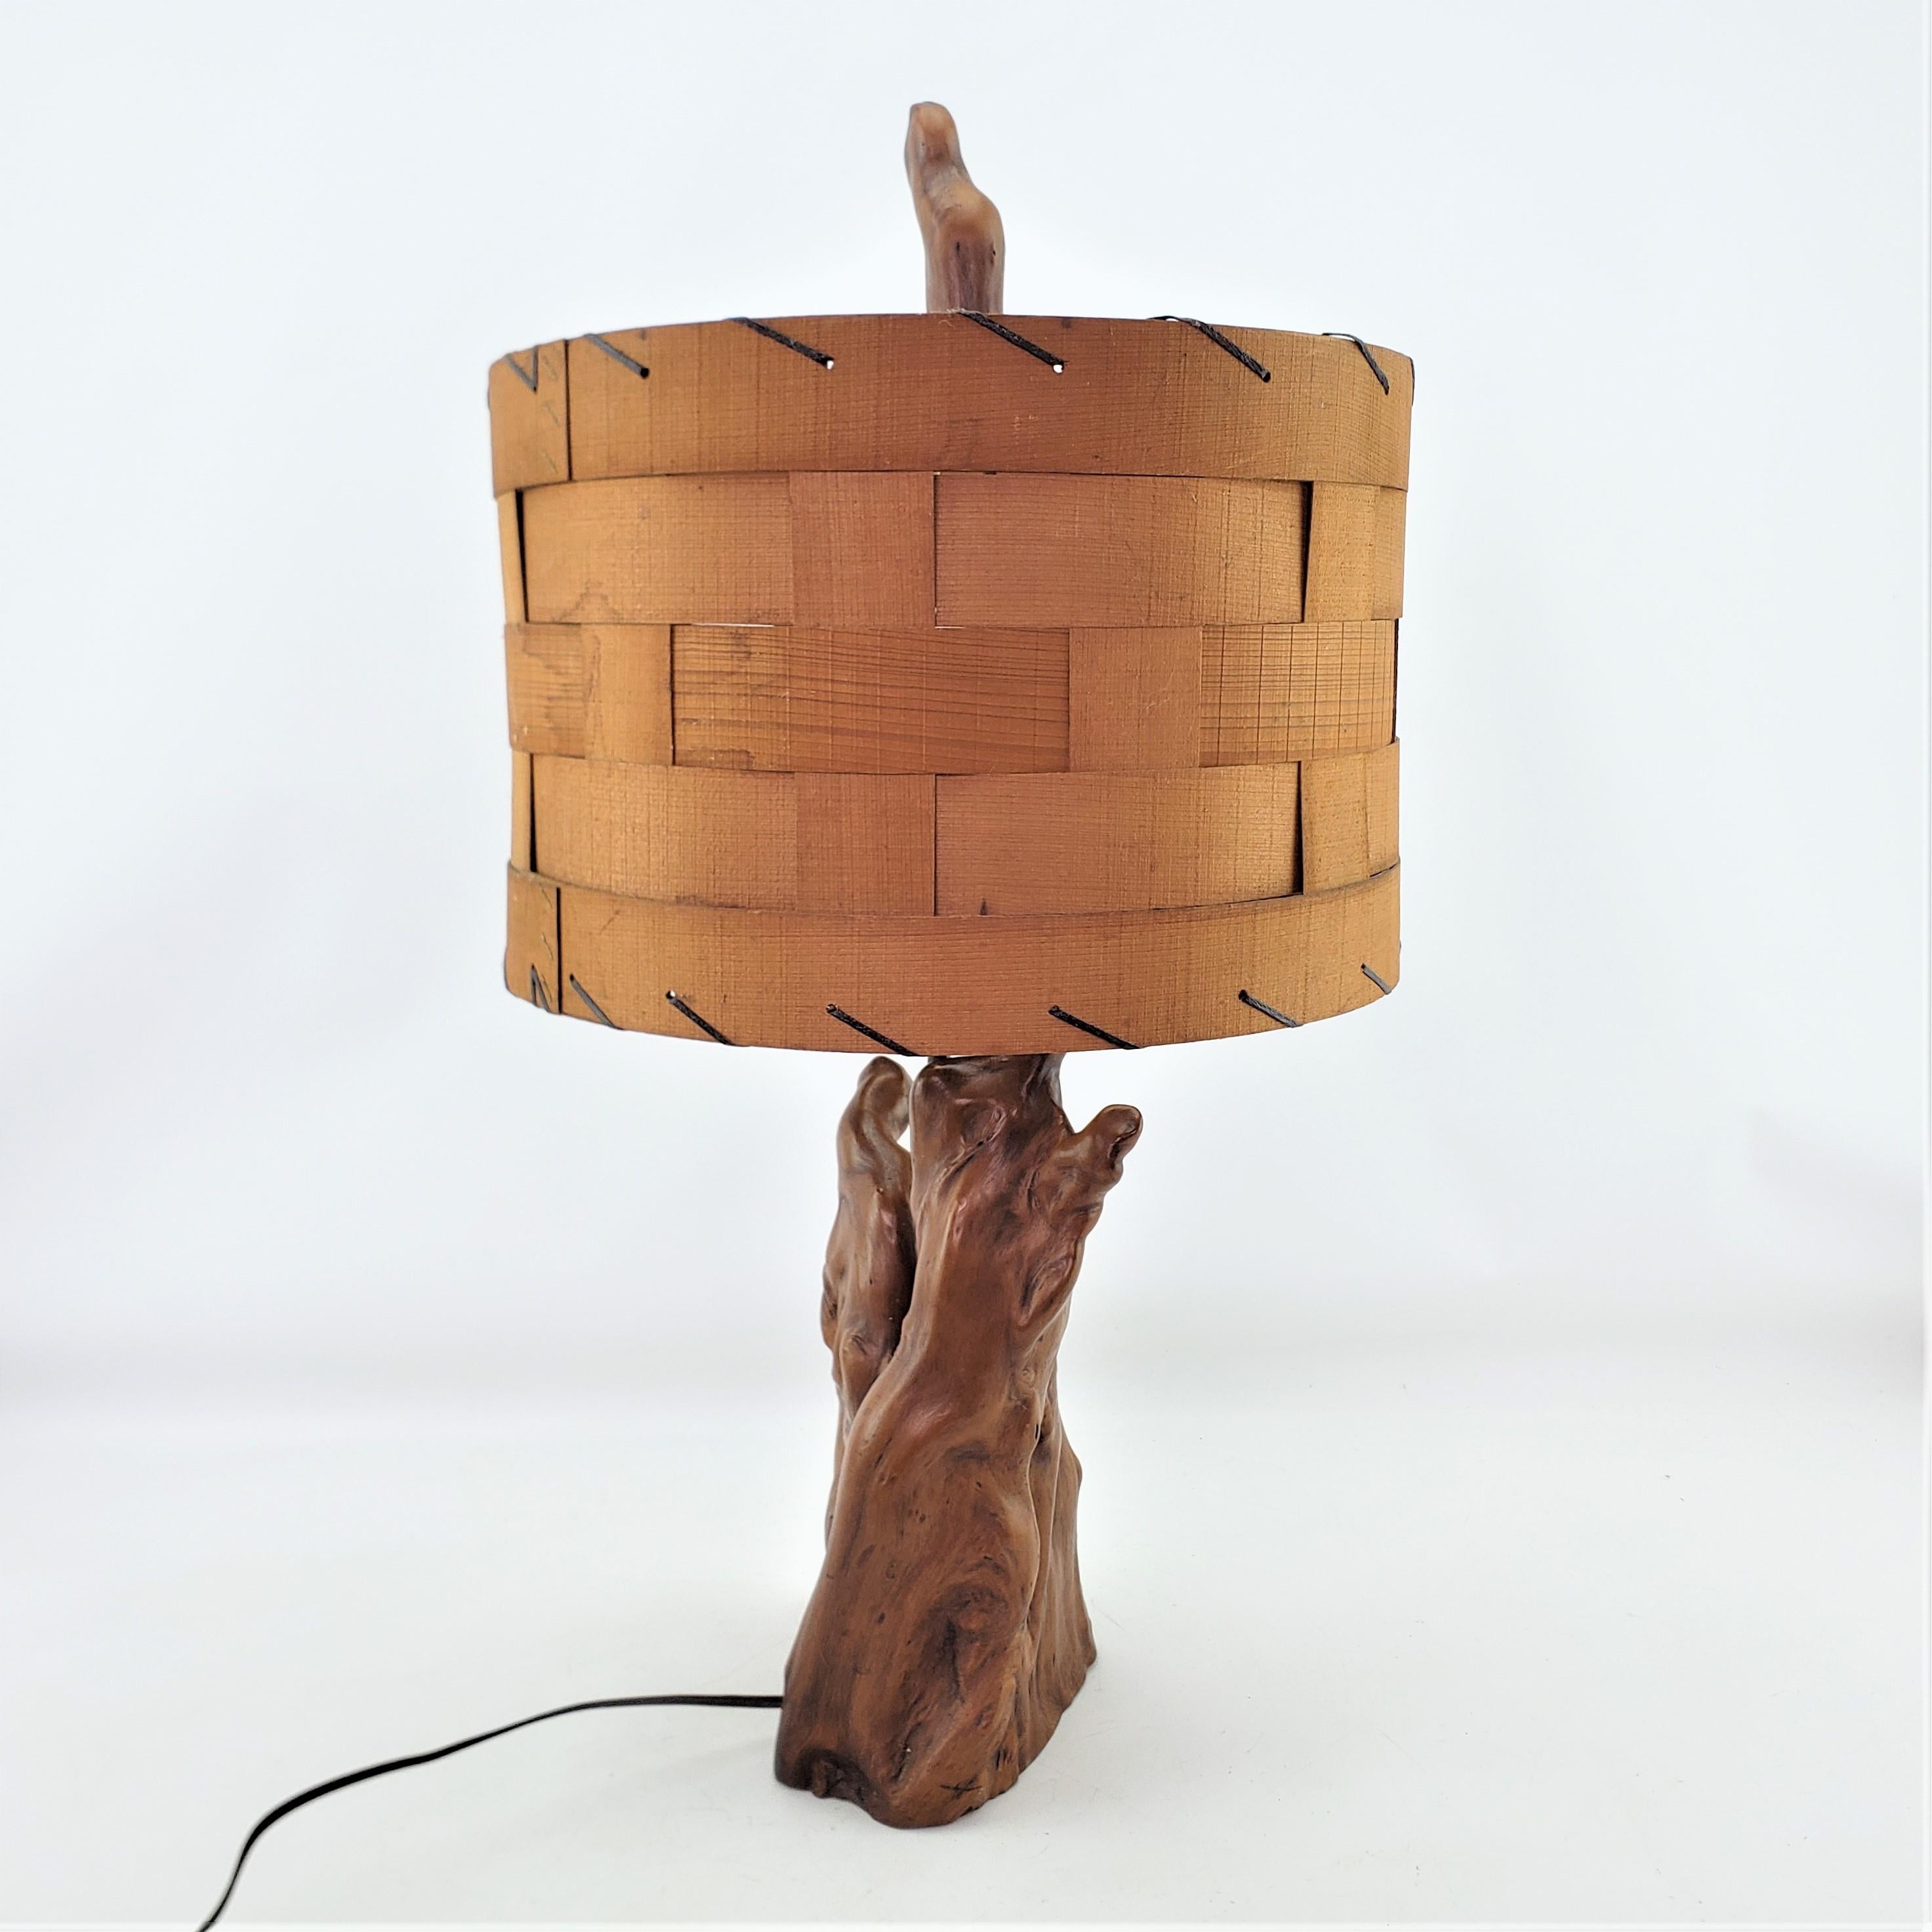 American Mid-Century Era Cypress Knees Sculptural Table Lamp with Woven Wooden Shade